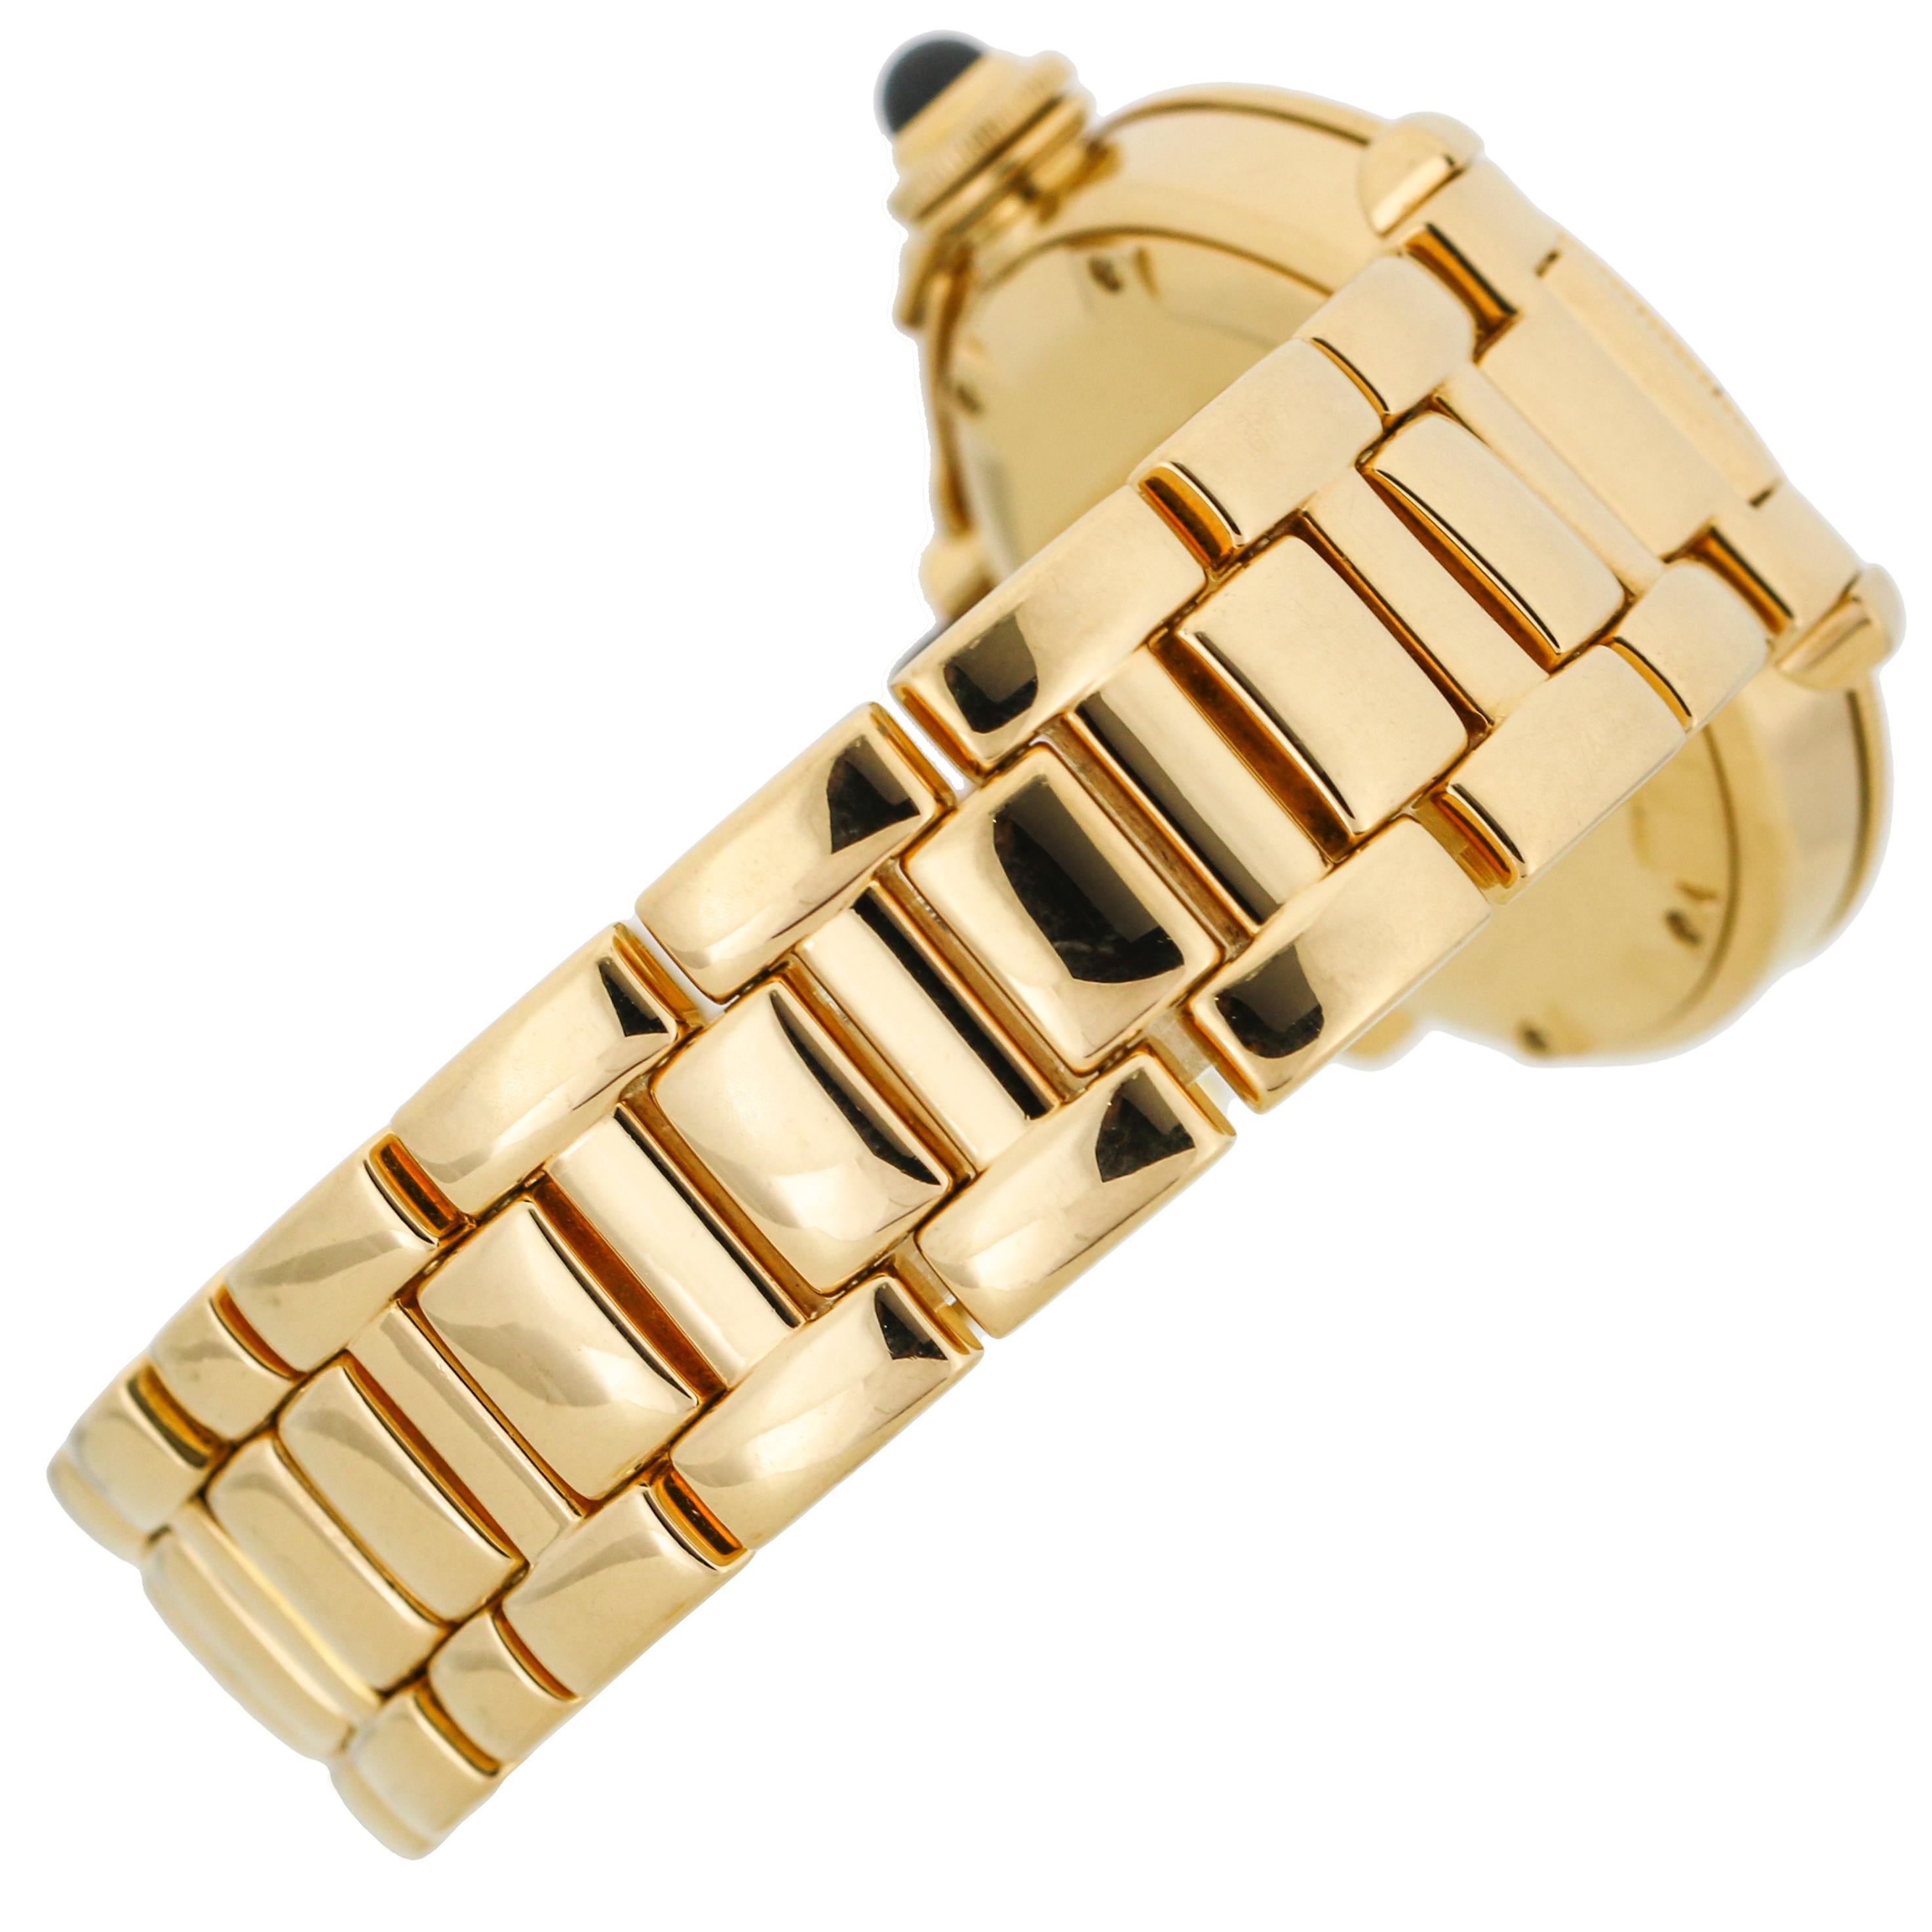 Cartier Pasha 18 Karat Yellow Gold Automatic Watch In Excellent Condition For Sale In Fort Lauderdale, FL